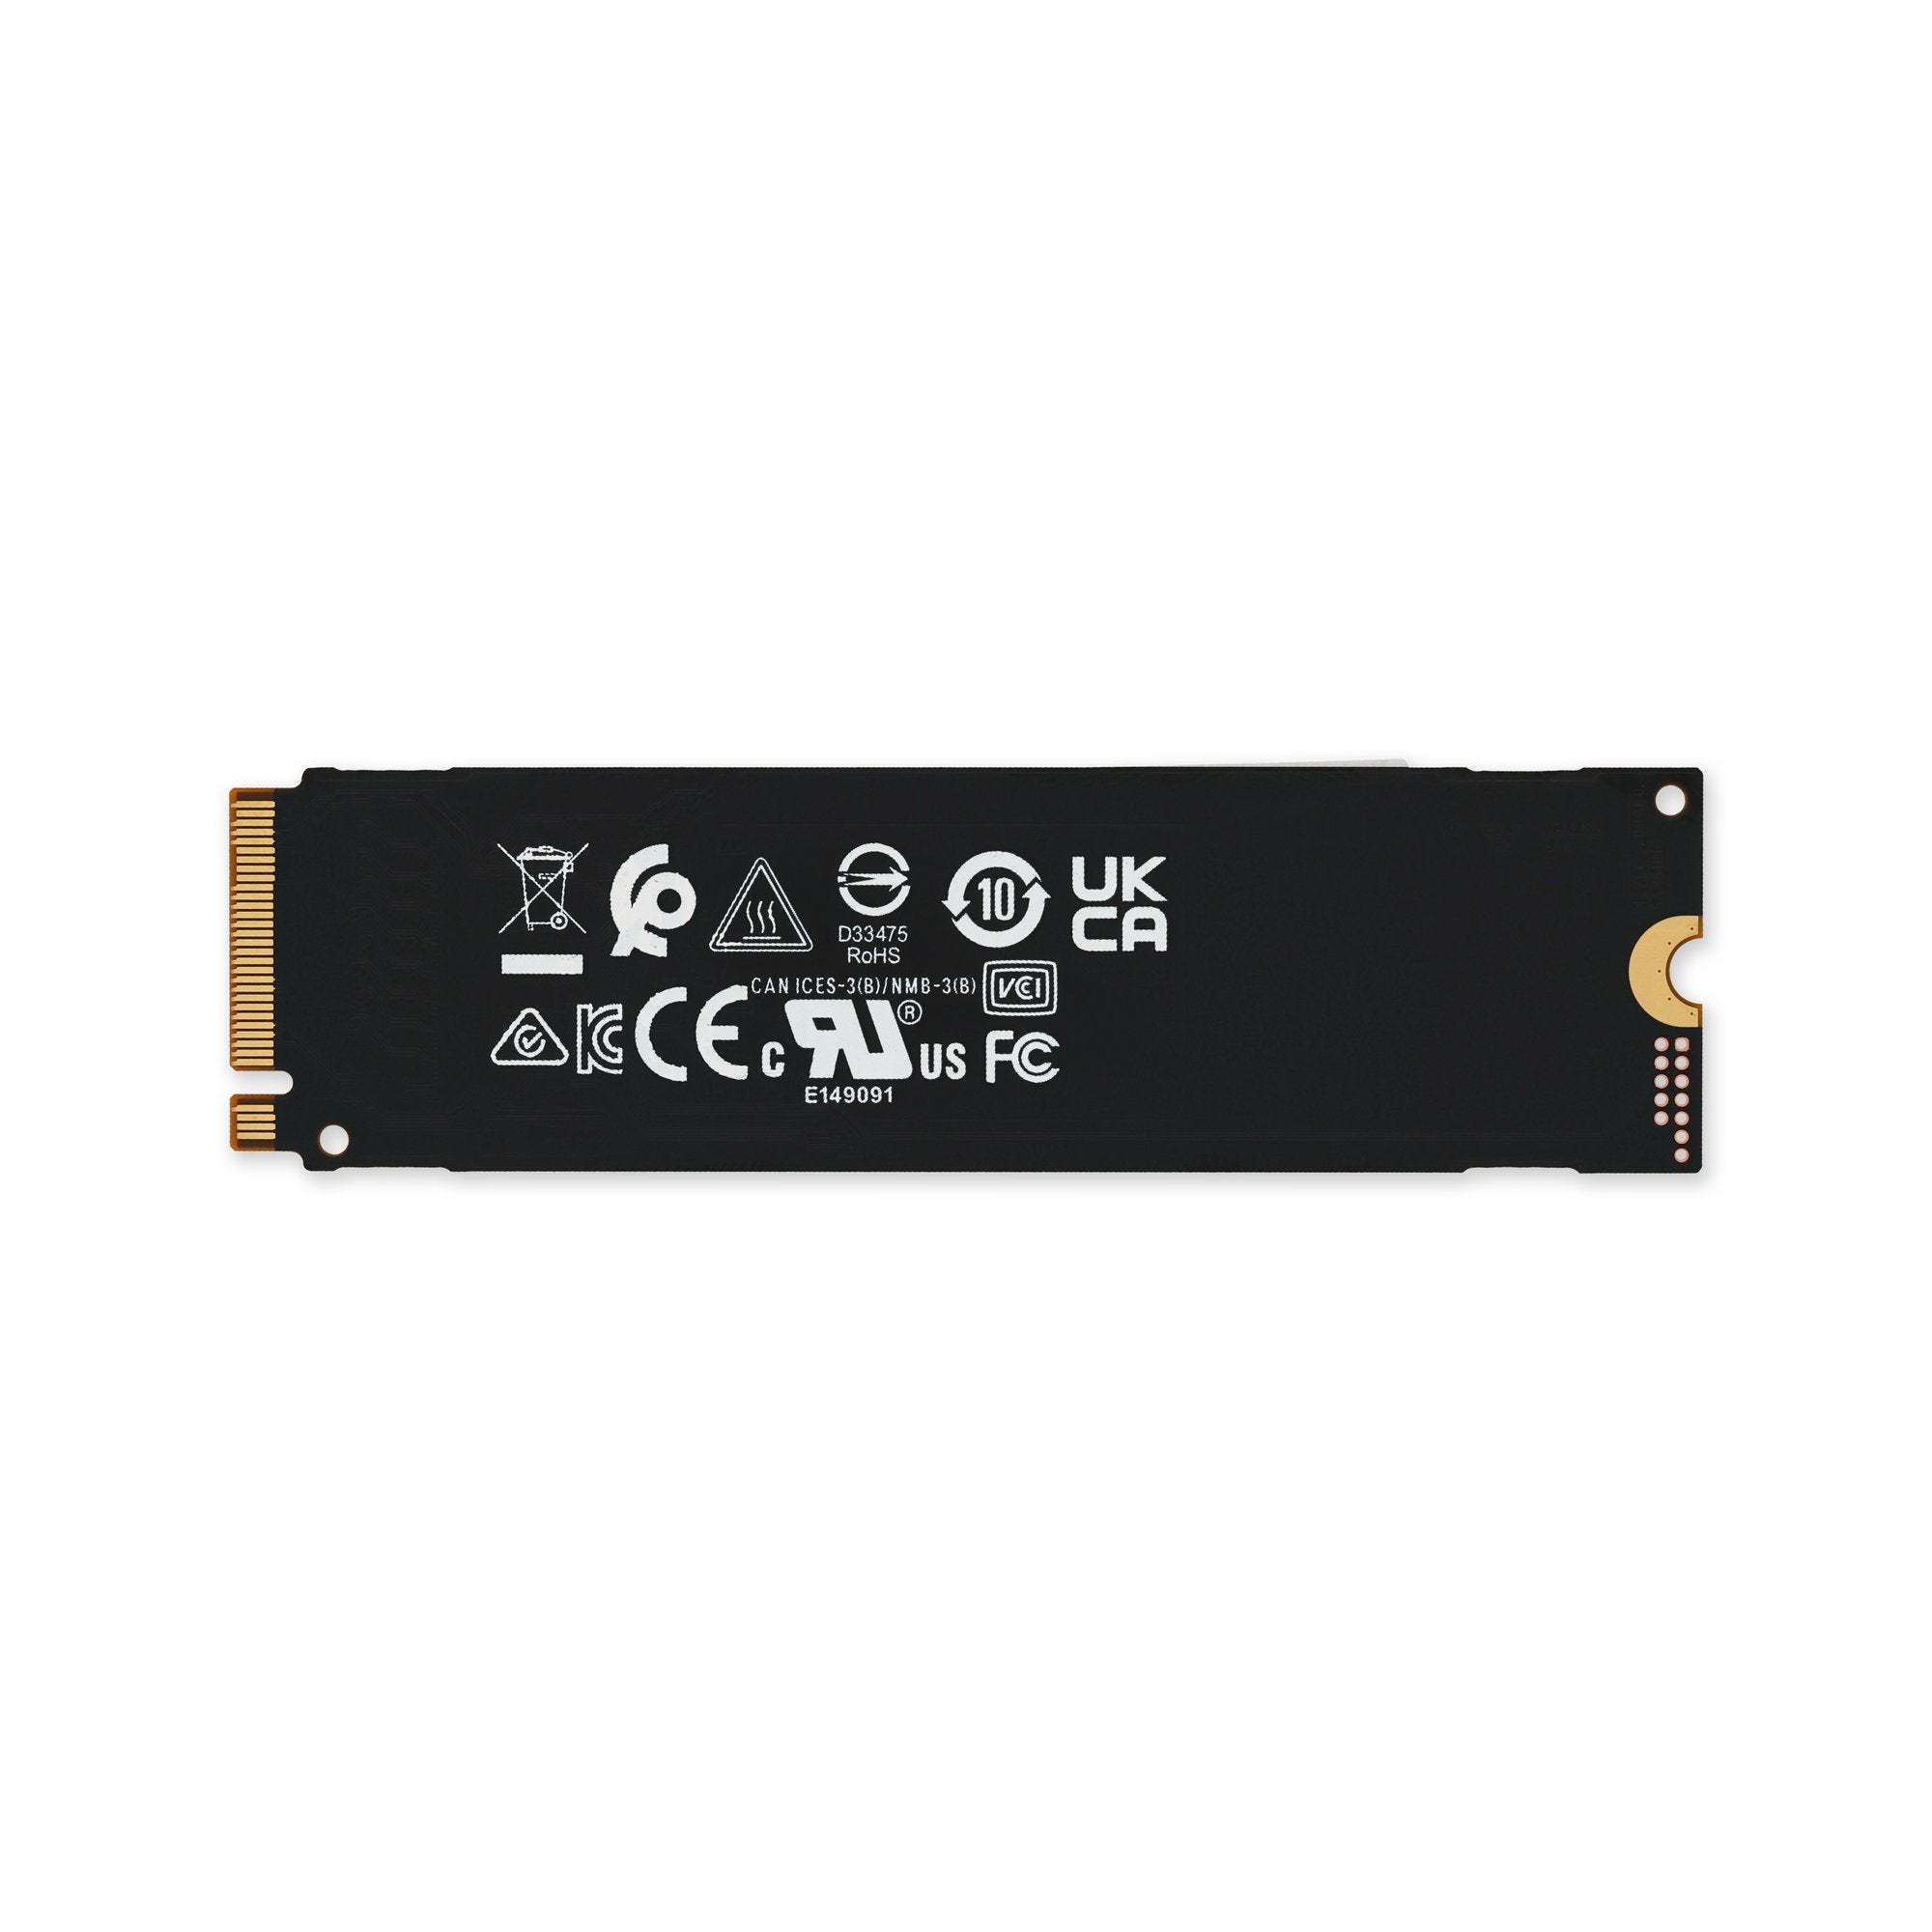 HP PCIe NVMe SSD - Genuine 512 GB New Part Only